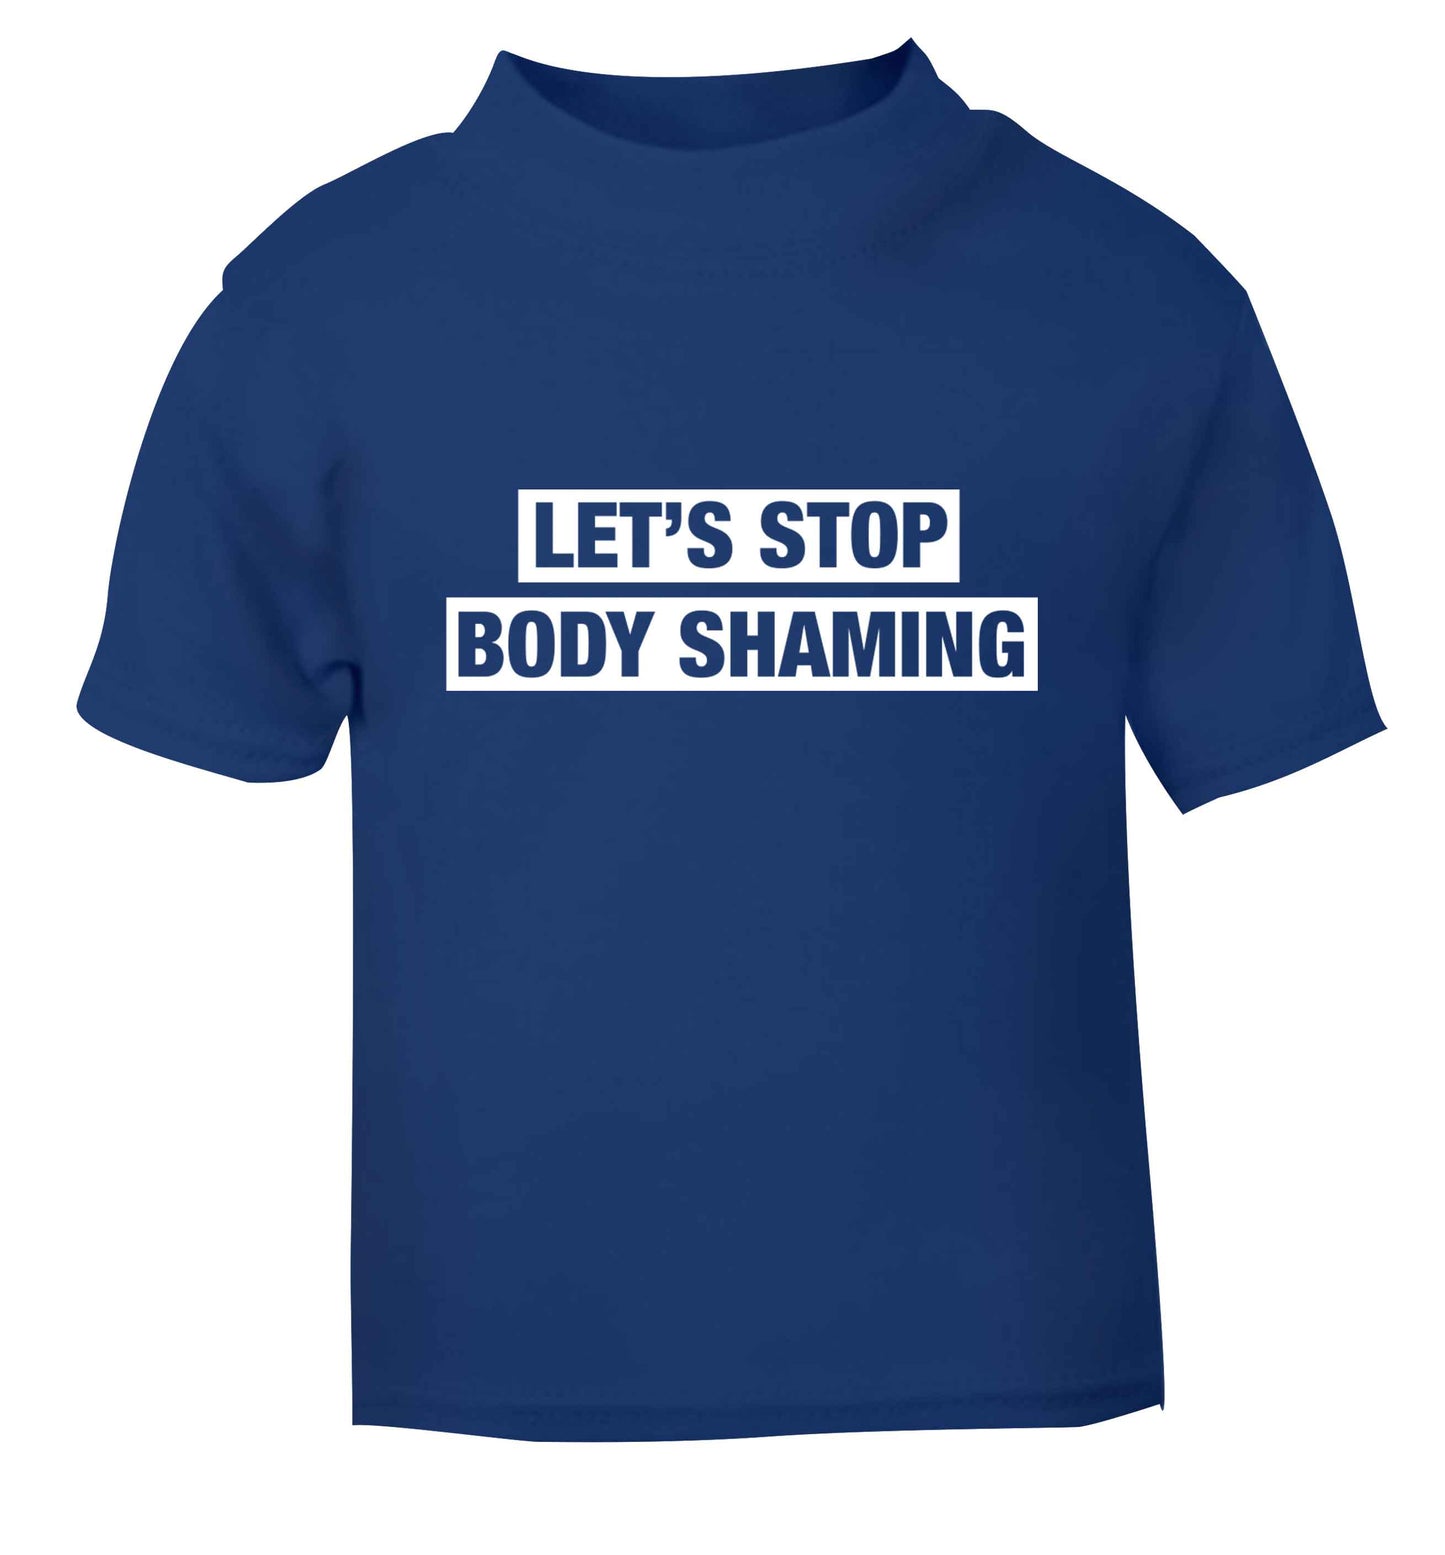 Let's stop body shaming blue baby toddler Tshirt 2 Years